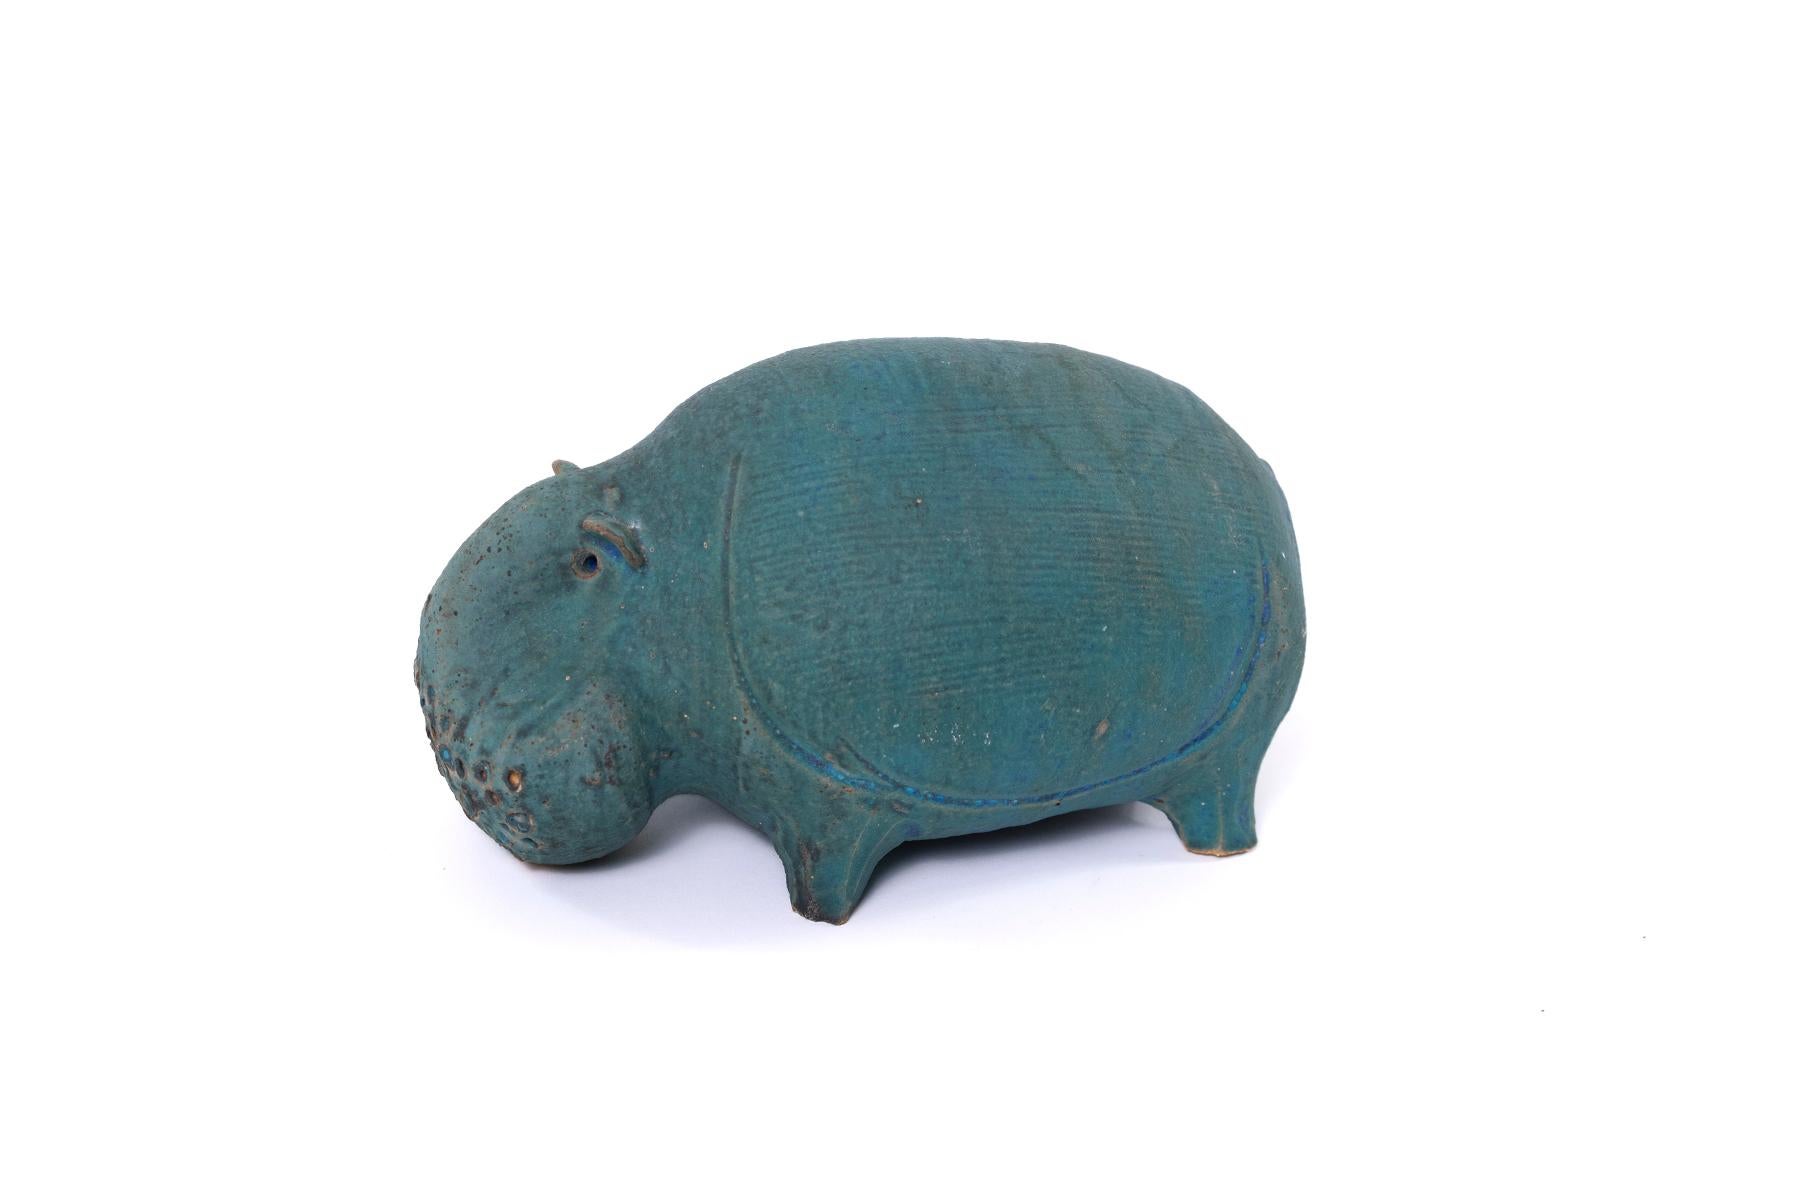 Turquoise ceramic hippo by California artist Hal Fromhold from the mid 1960s.